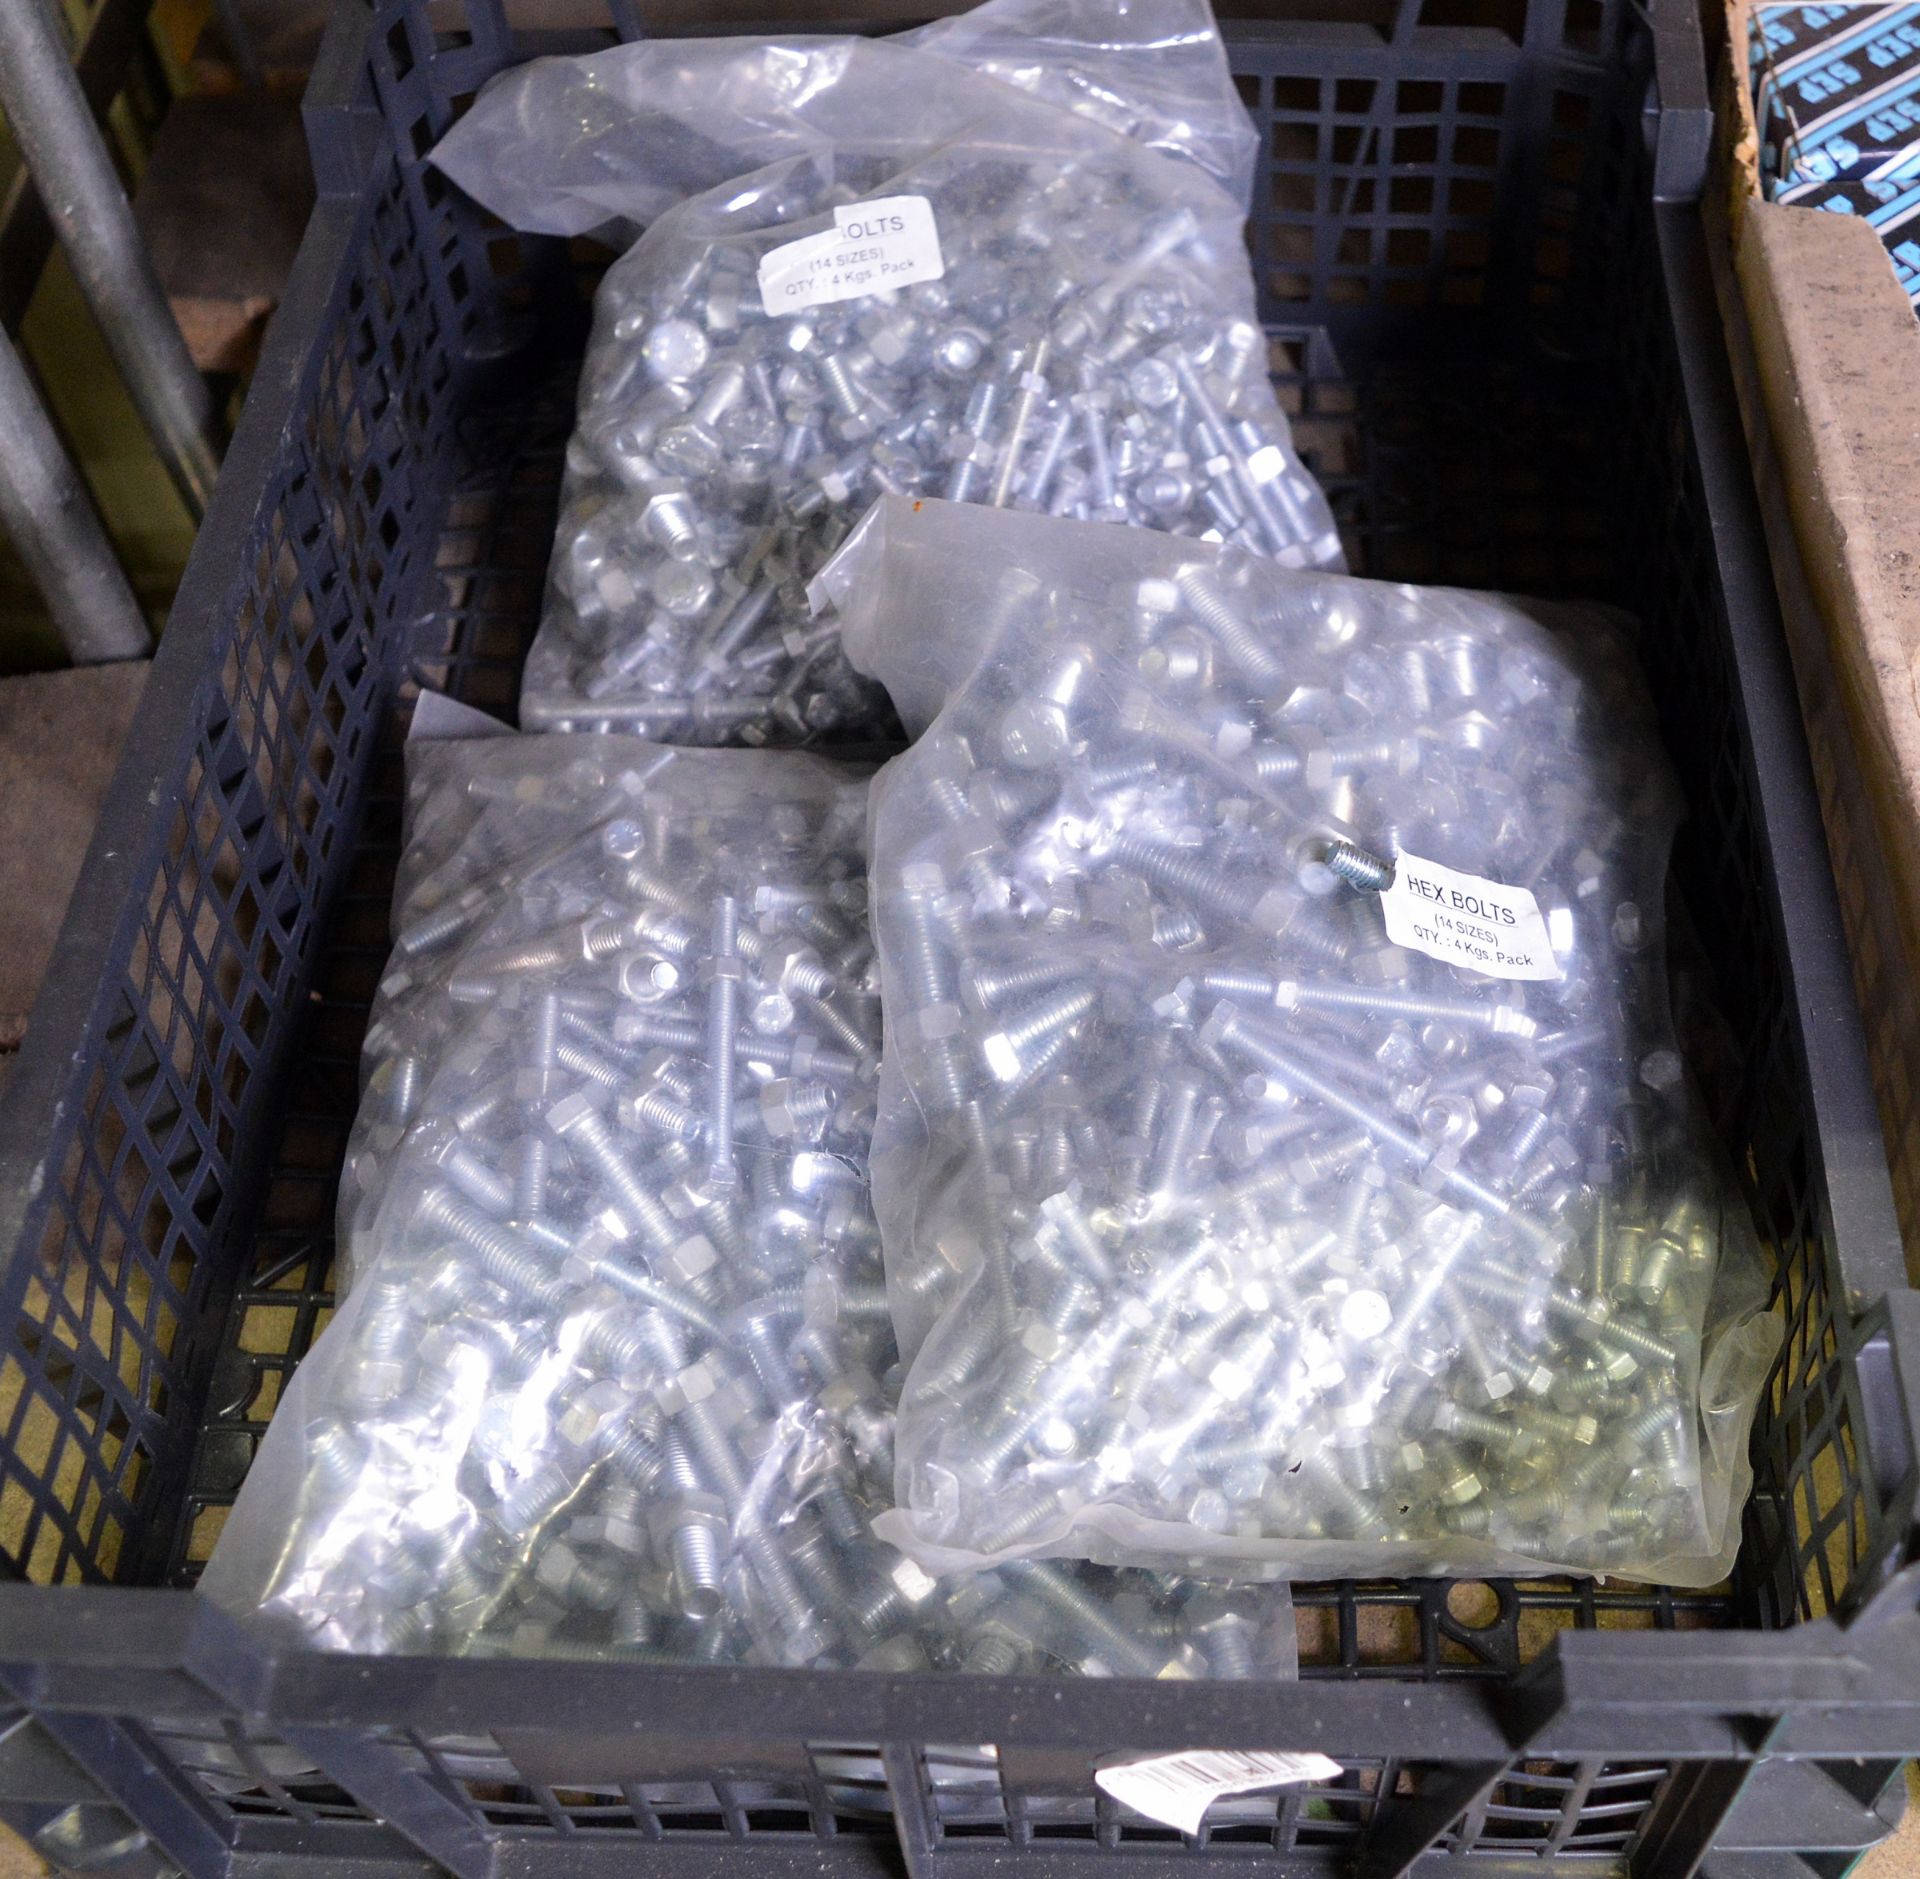 Nuts & bolts, SEP speed screws - 4.5x30 hardened approx. 200 per box - 24 boxes - Image 2 of 2